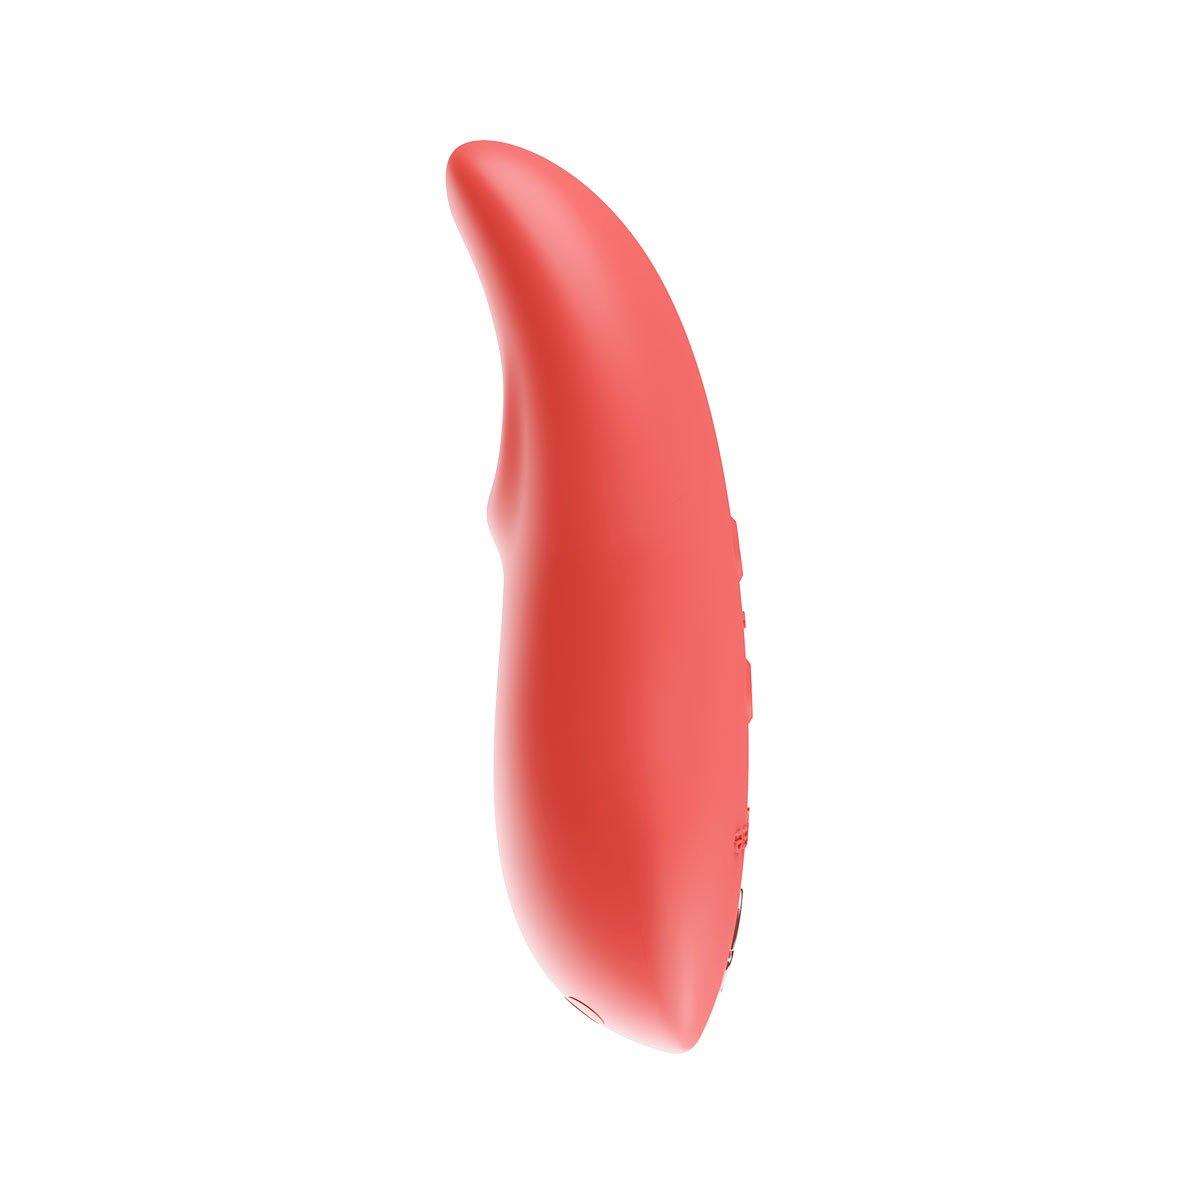 We-Vibe Touch X Coral - Buy At Luxury Toy X - Free 3-Day Shipping